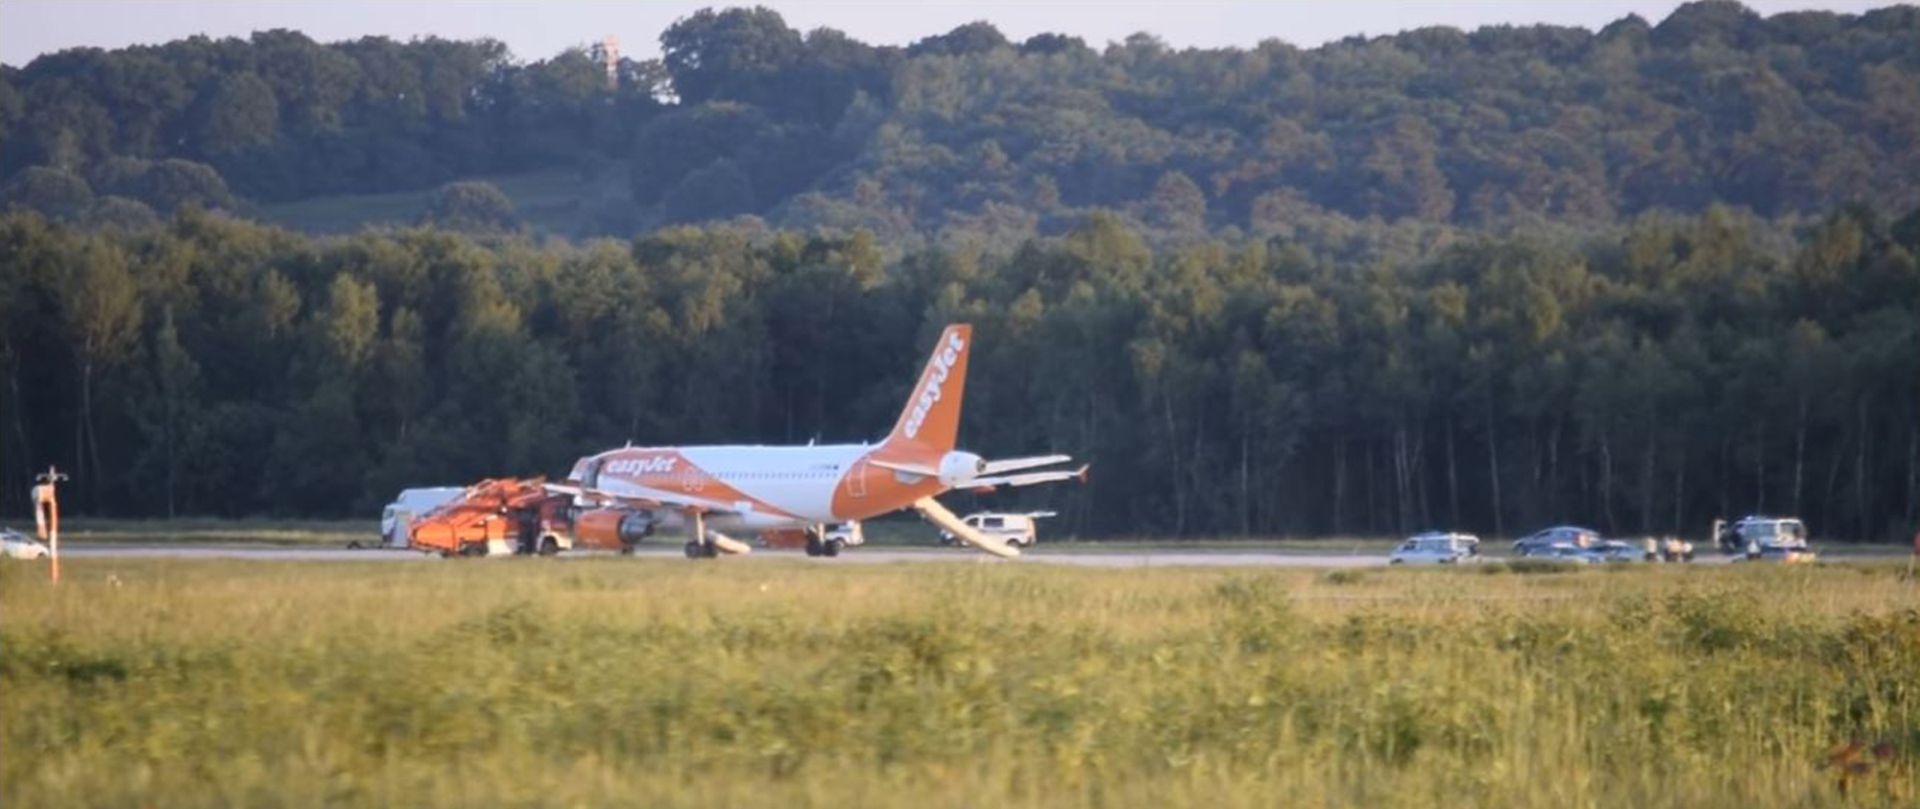 A video still shows the Easyjet airplane with its emergency slide down on the runway of the airport Cologne/Bonn in Cologne, Germany, 10 June 2017. The cause for the scene was a suspicious situation on board. The pilot of the airplane decided on an unscheduled landing. Photo: Thomas Kraus/dpa